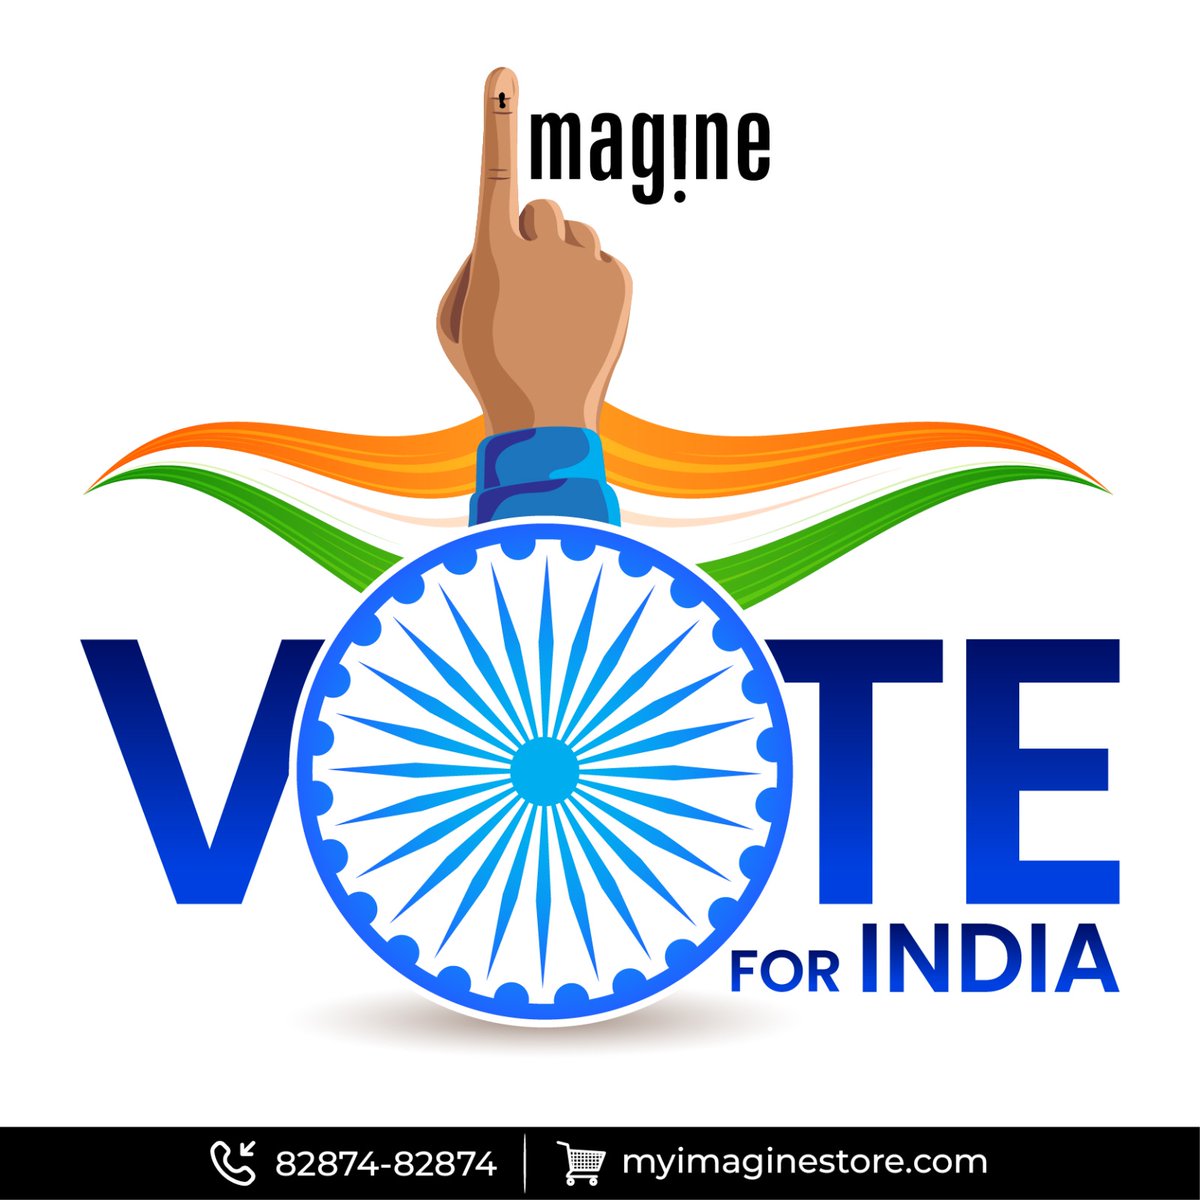 Voting empowers us to choose our leaders and influence government policies, ensuring a government that reflects the people's will and upholds democracy. #Tresor #Apple #Imagine #VoteForIndia #GoVote